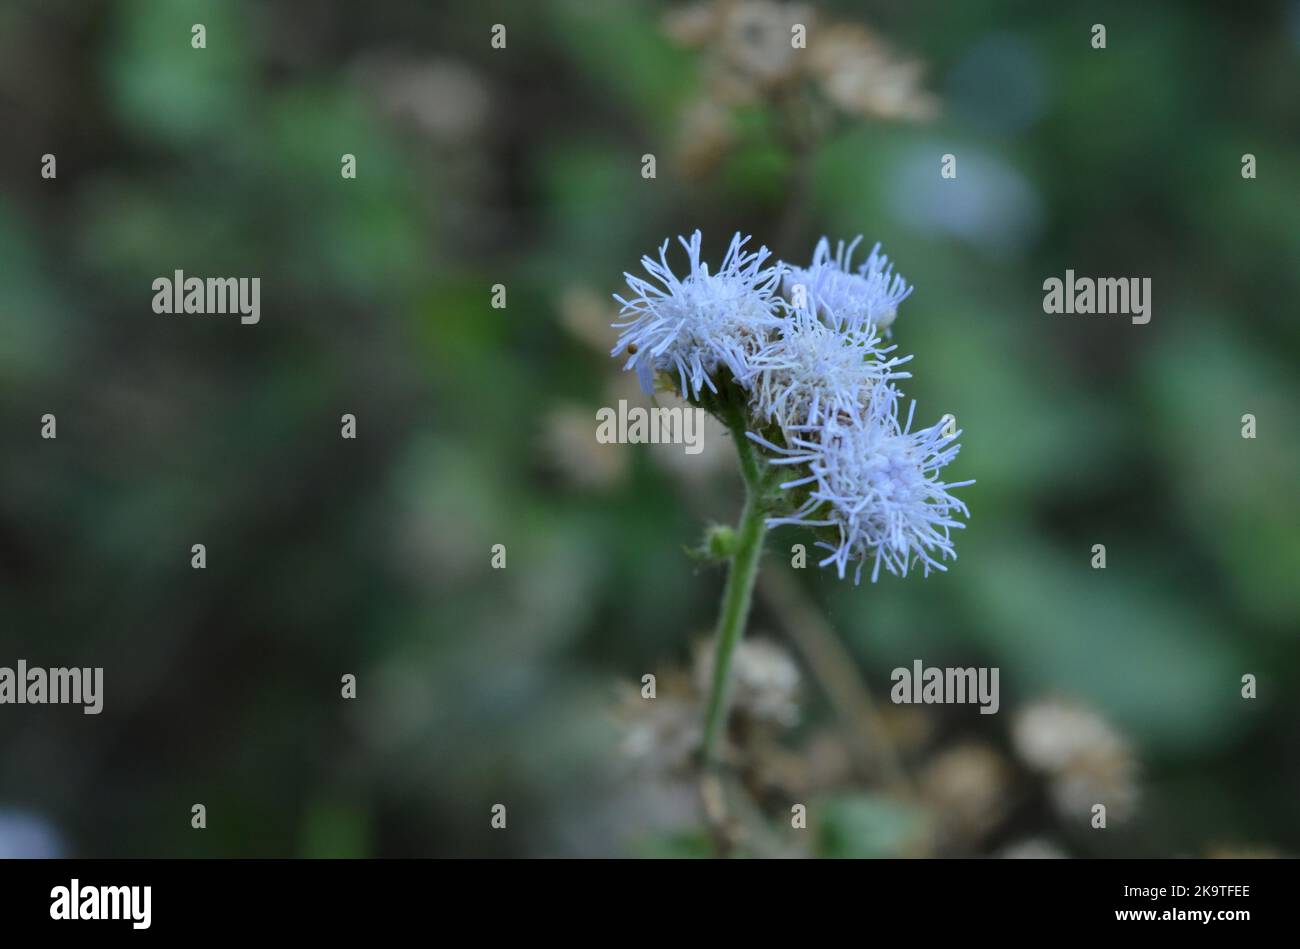 Close up photo of billygoat weed flower in blur green background Stock Photo